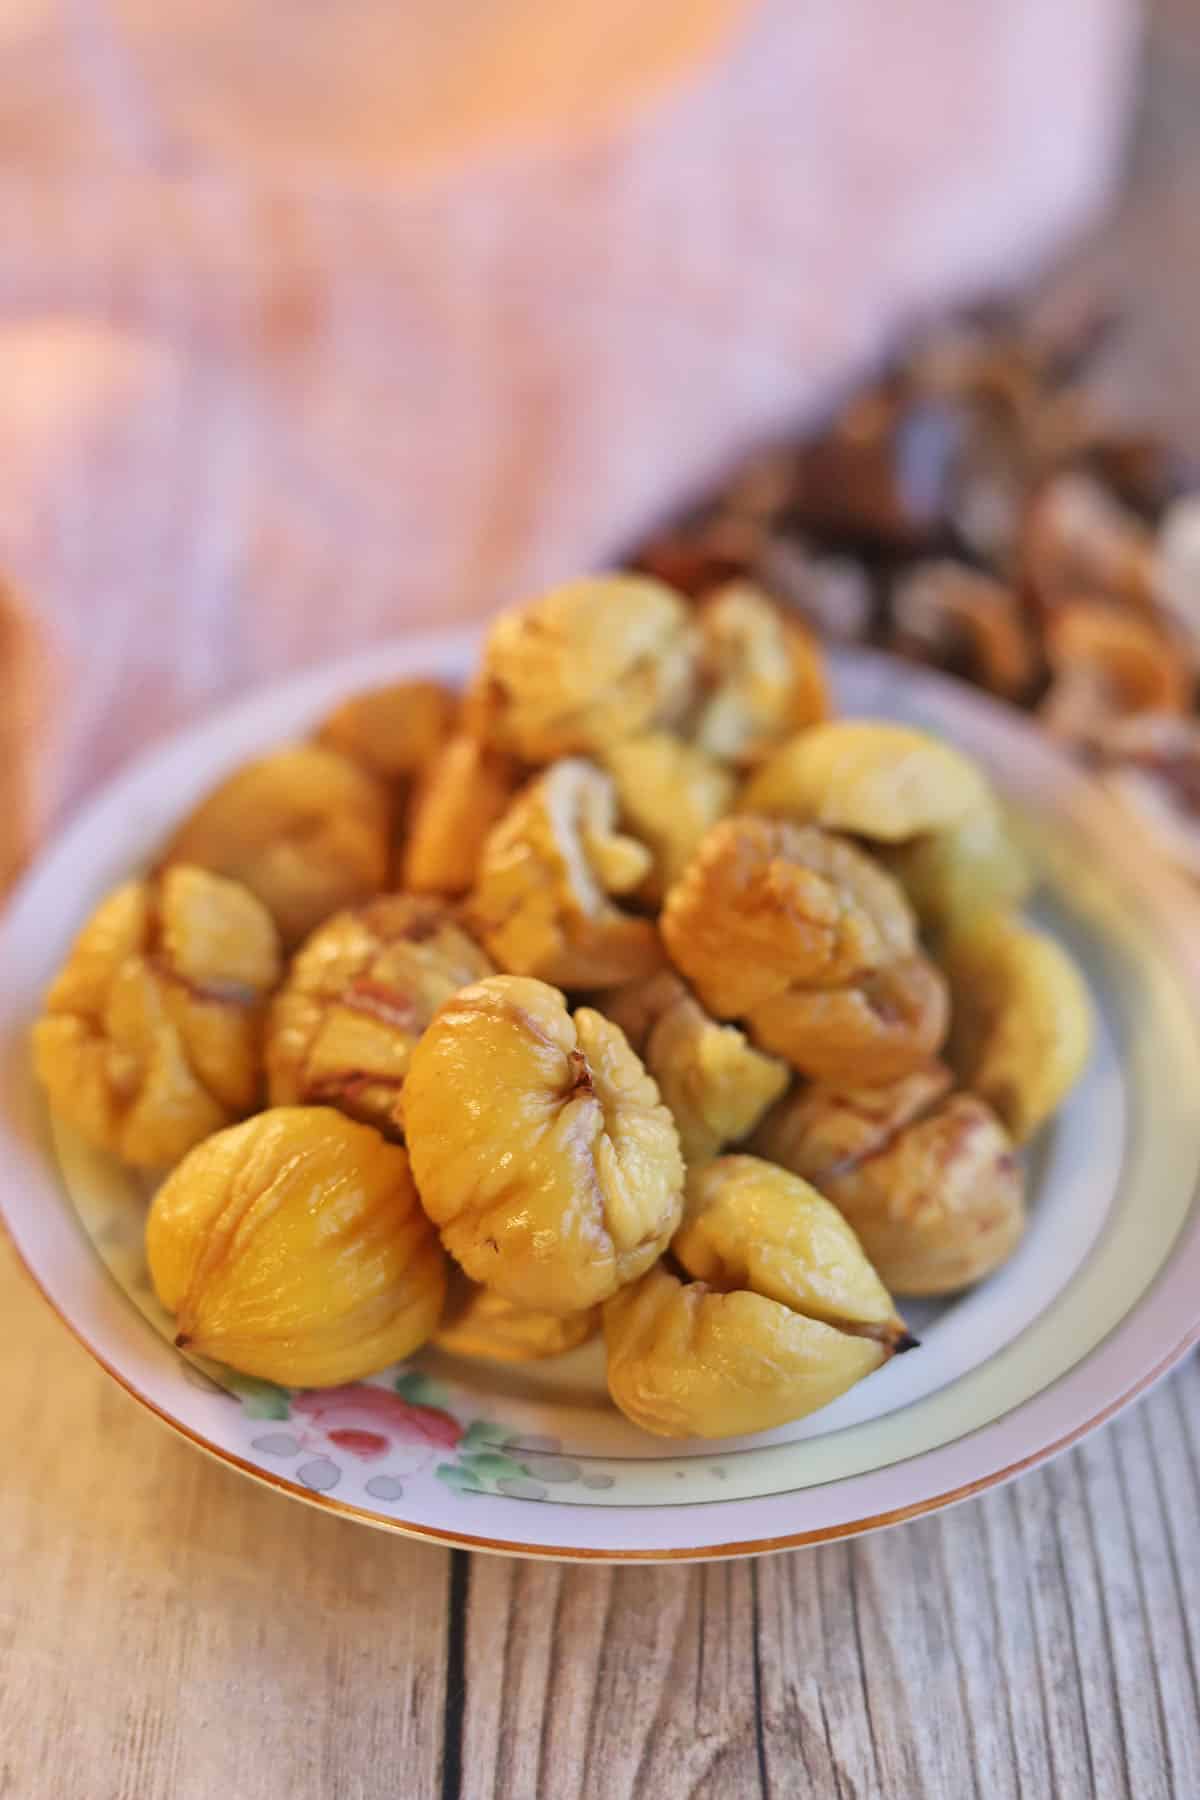 Peeled chestnuts on a plate.